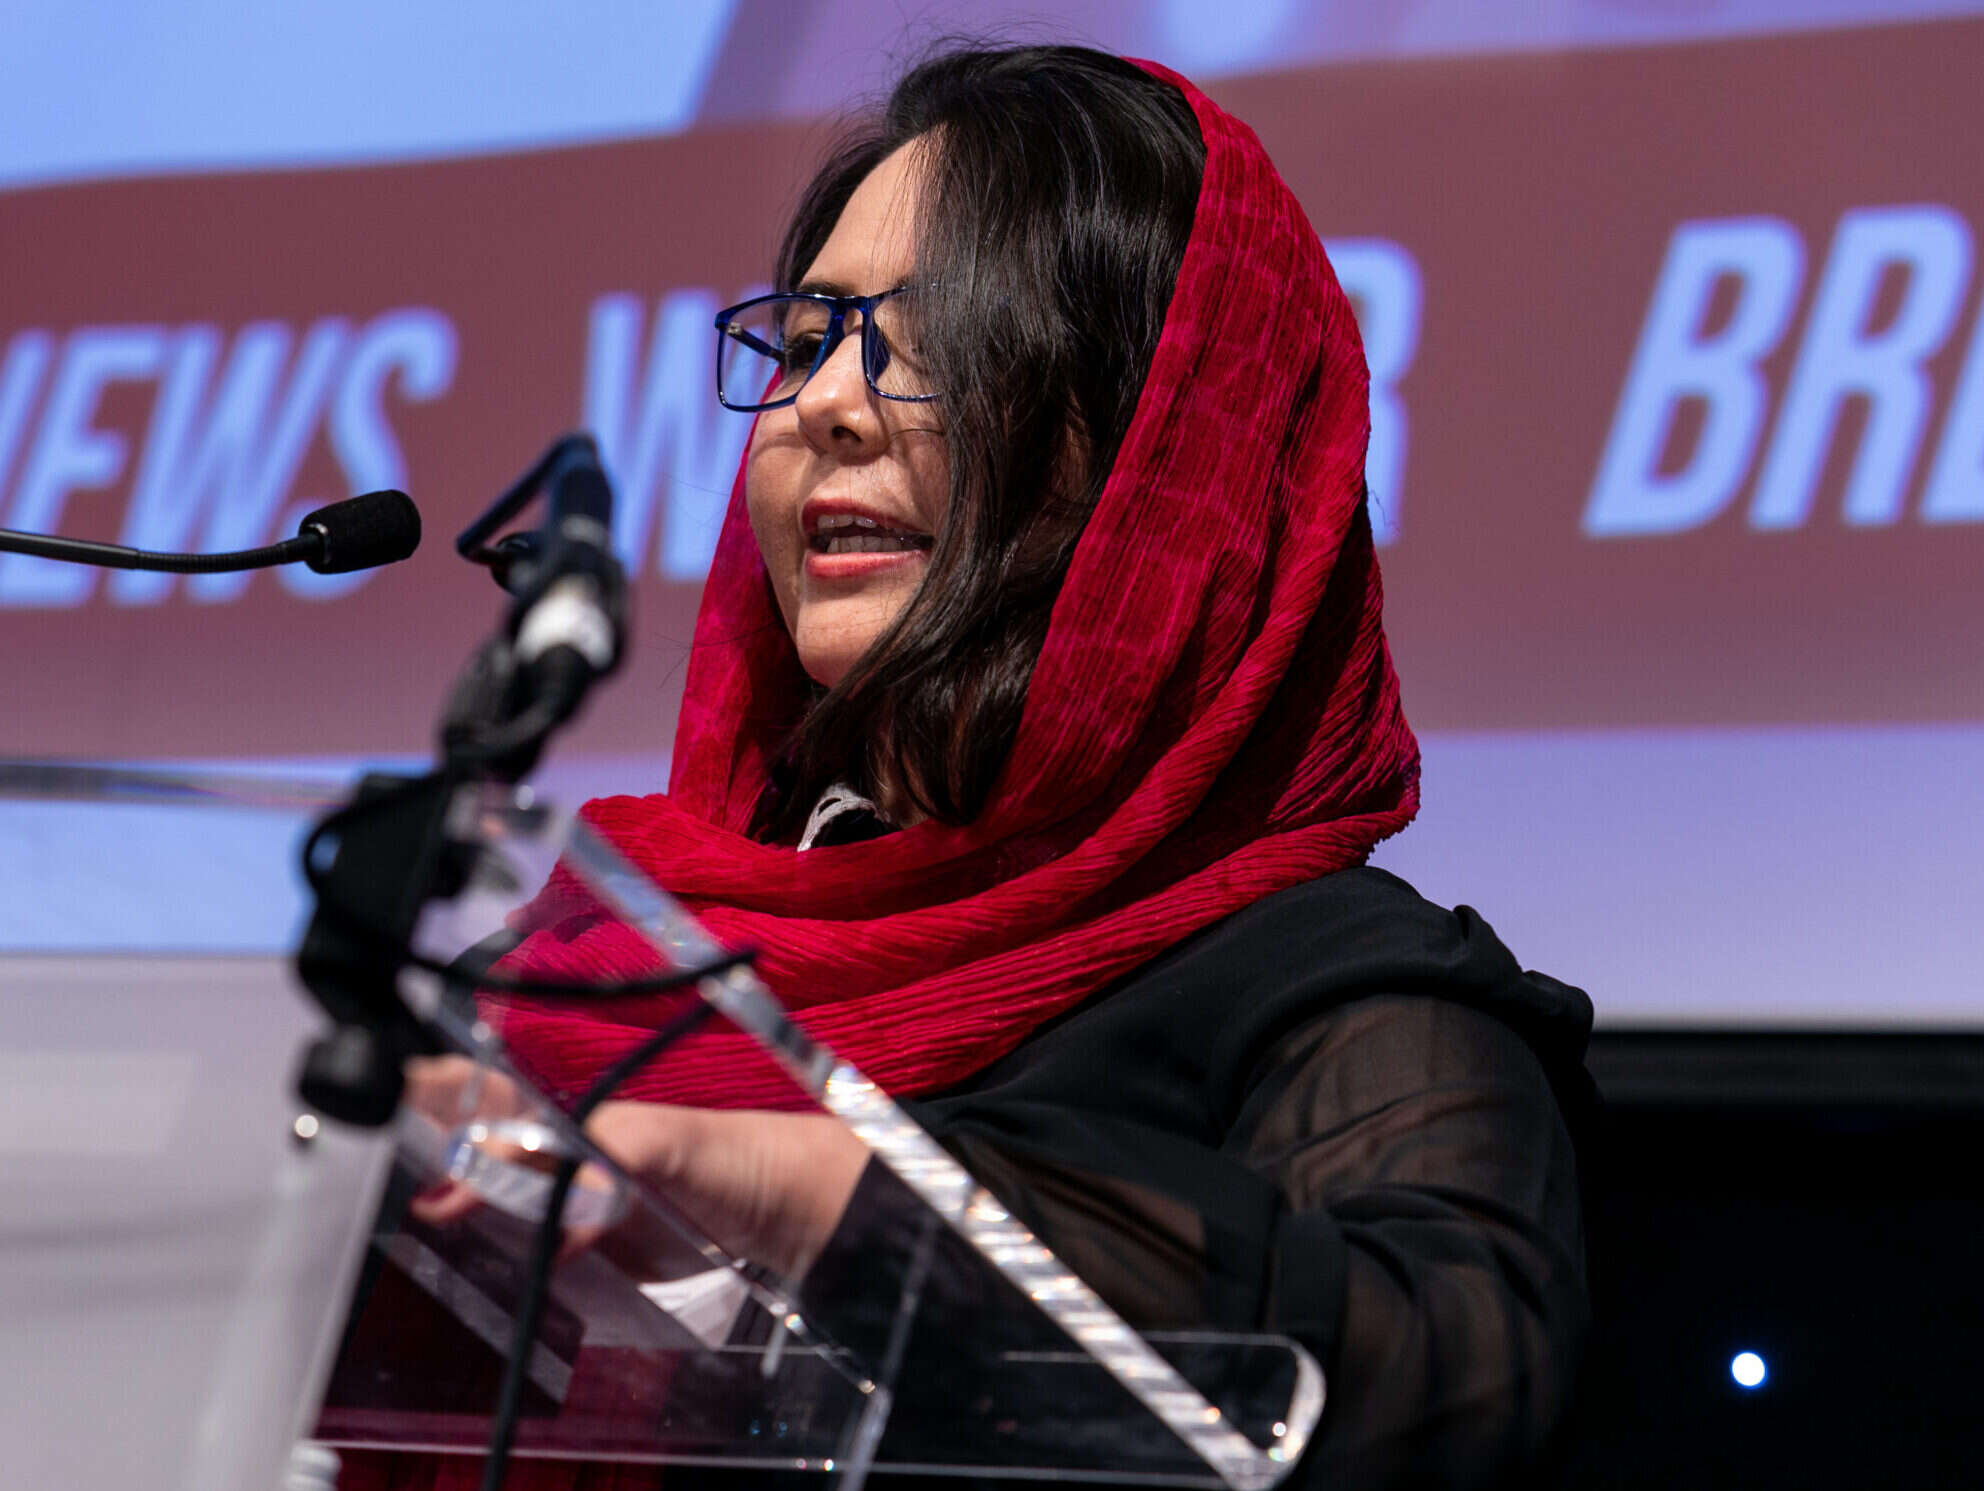 Colvin award-winning Rukhshana Media founder: 'Exposing the truth can result in death and torture'